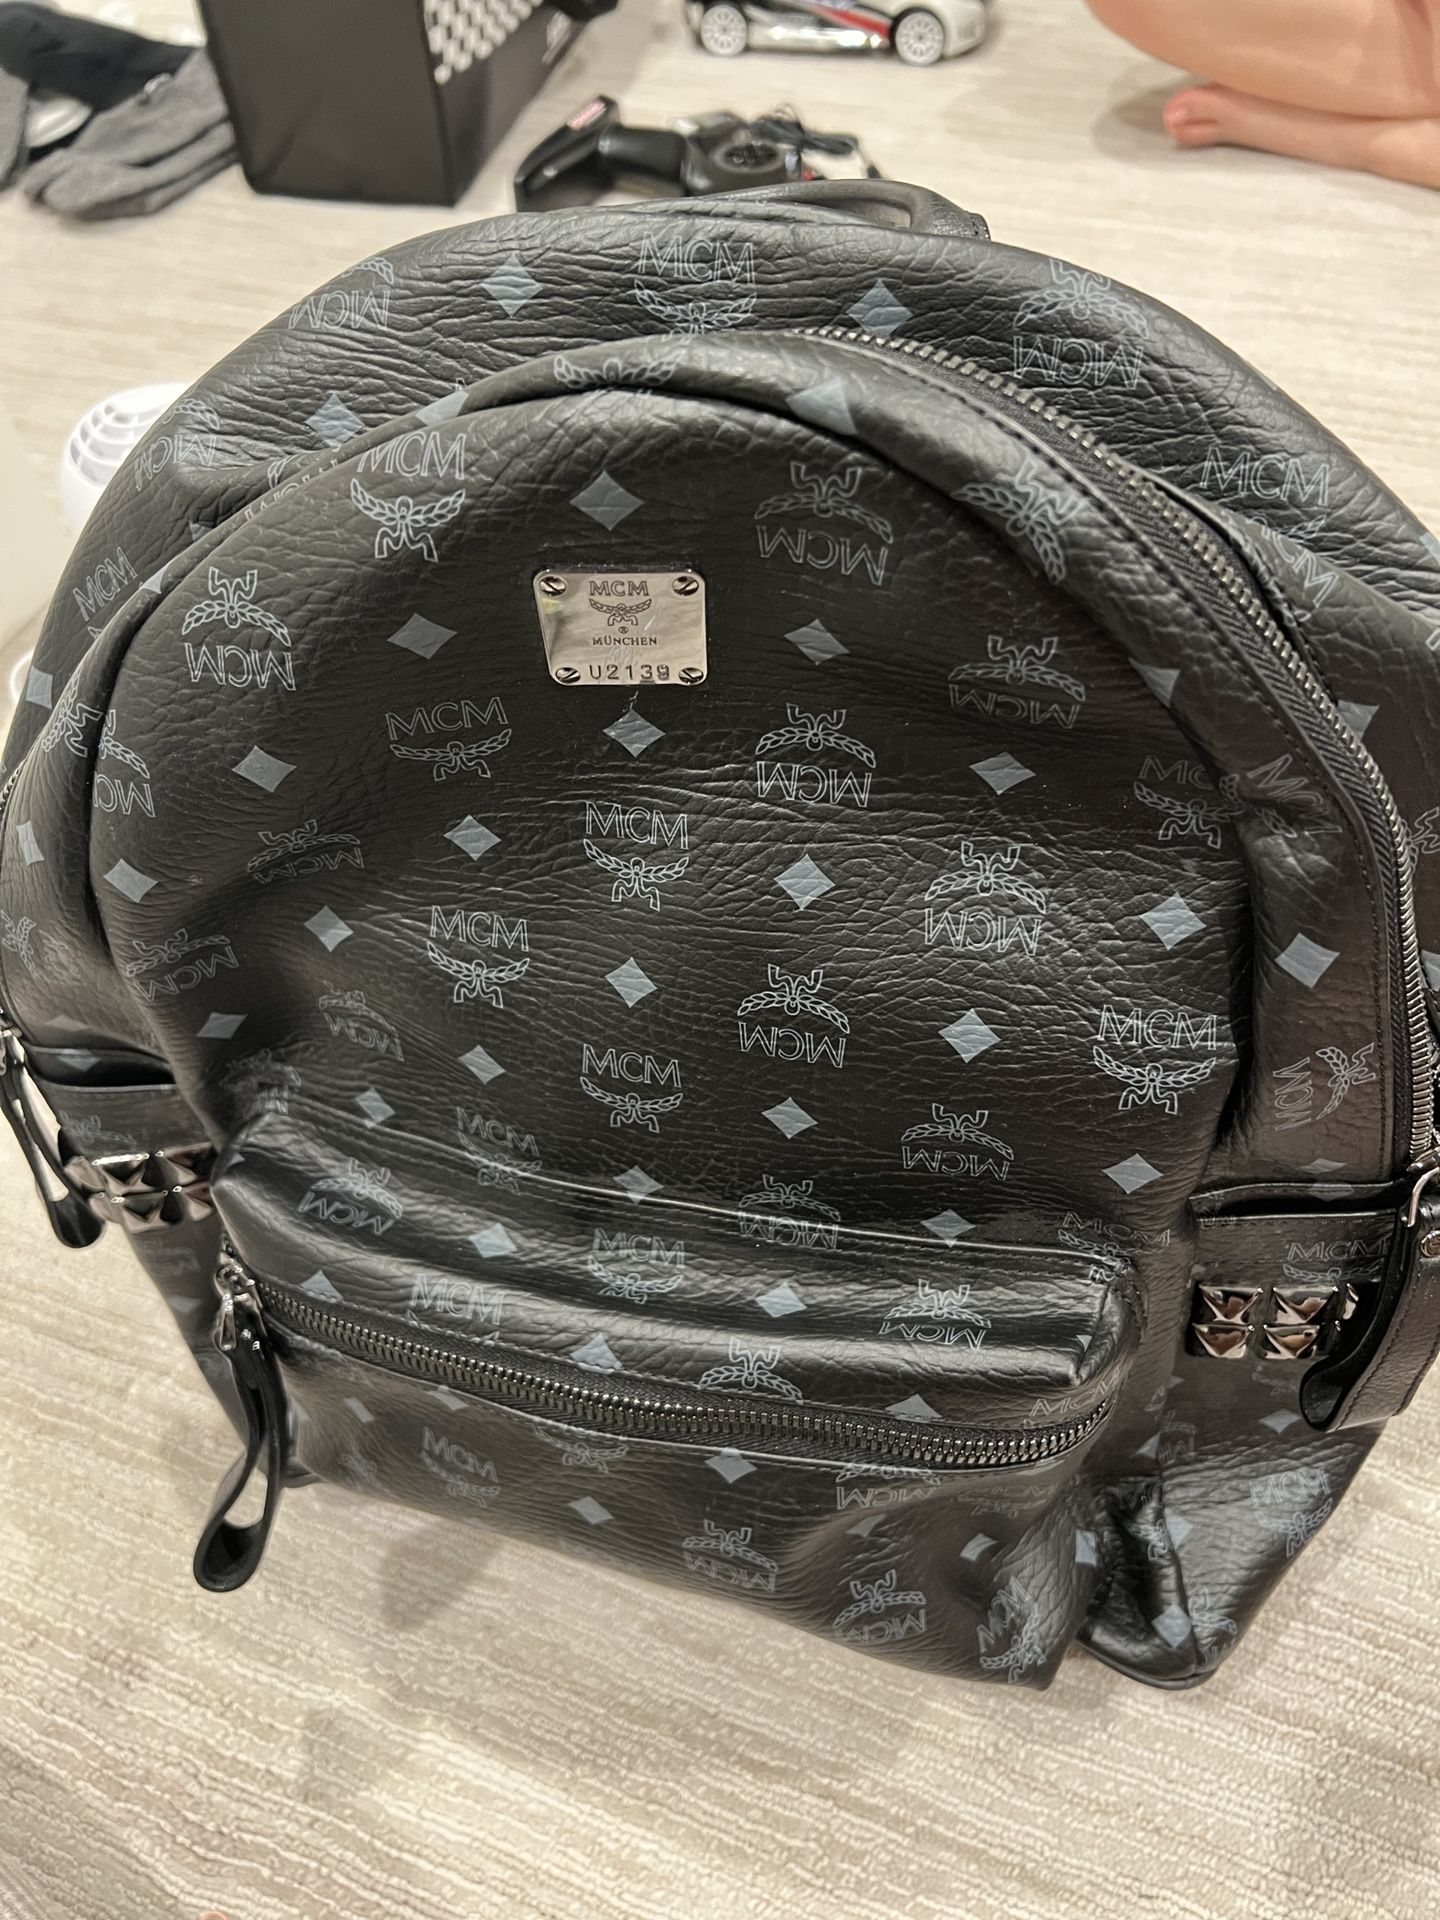 Bape X MCM Backpack for Sale in City Of Industry, CA - OfferUp